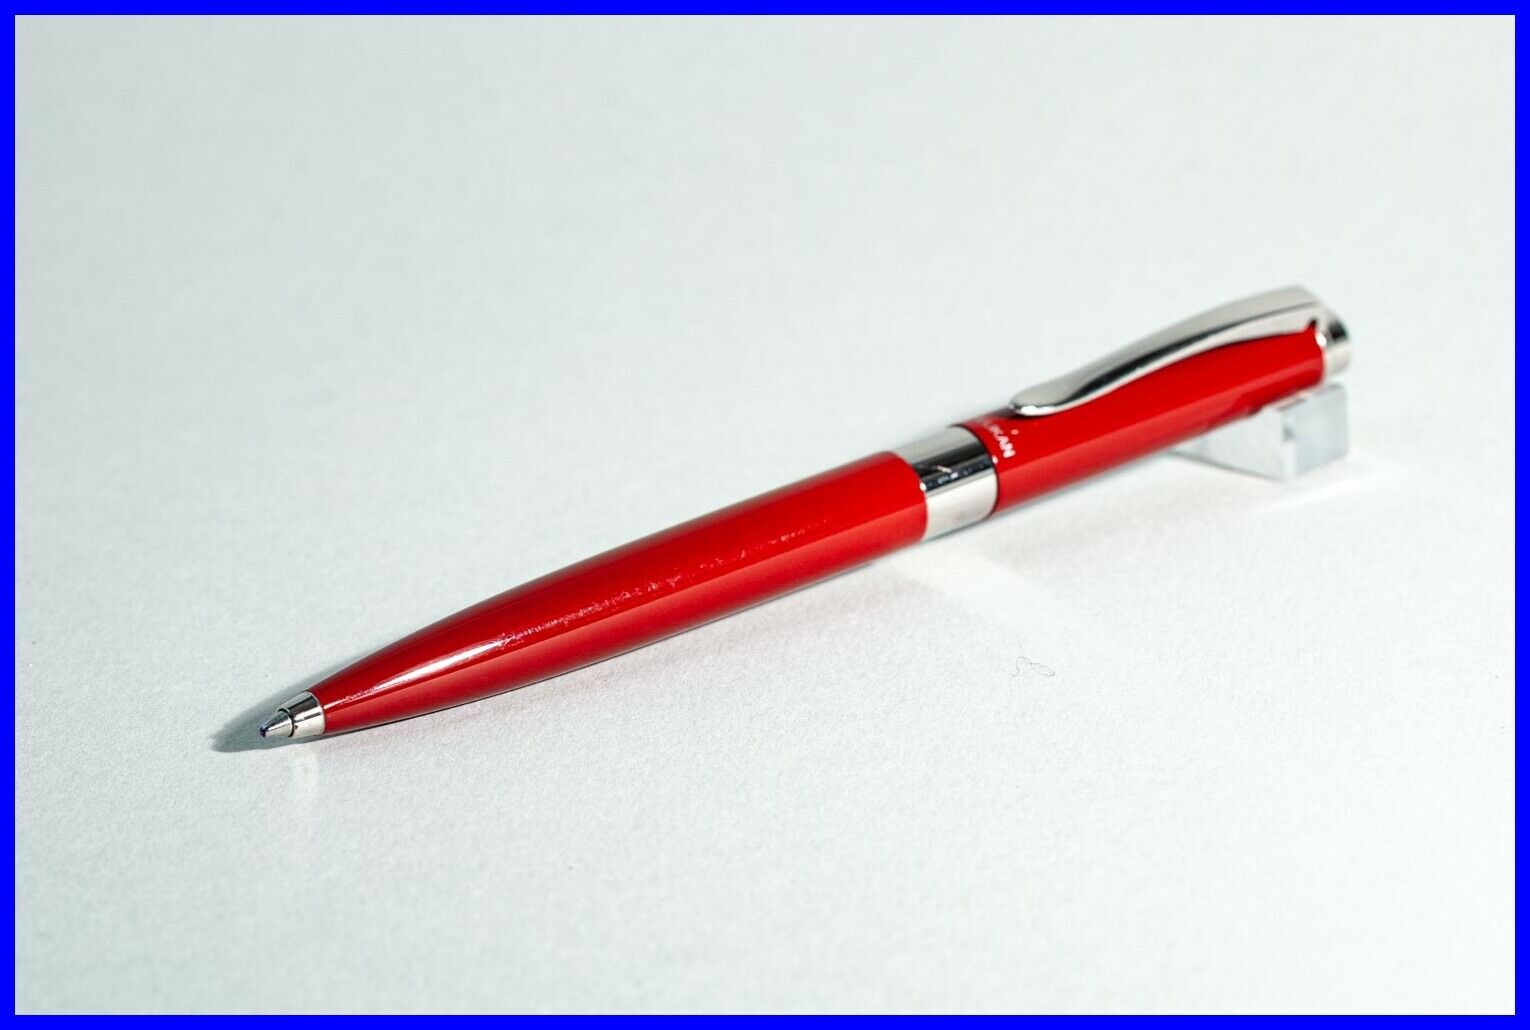 K 570 Pelikan Ballpoint Pen, Celebry Line Approx 1997 Made Coral Red & Chrome